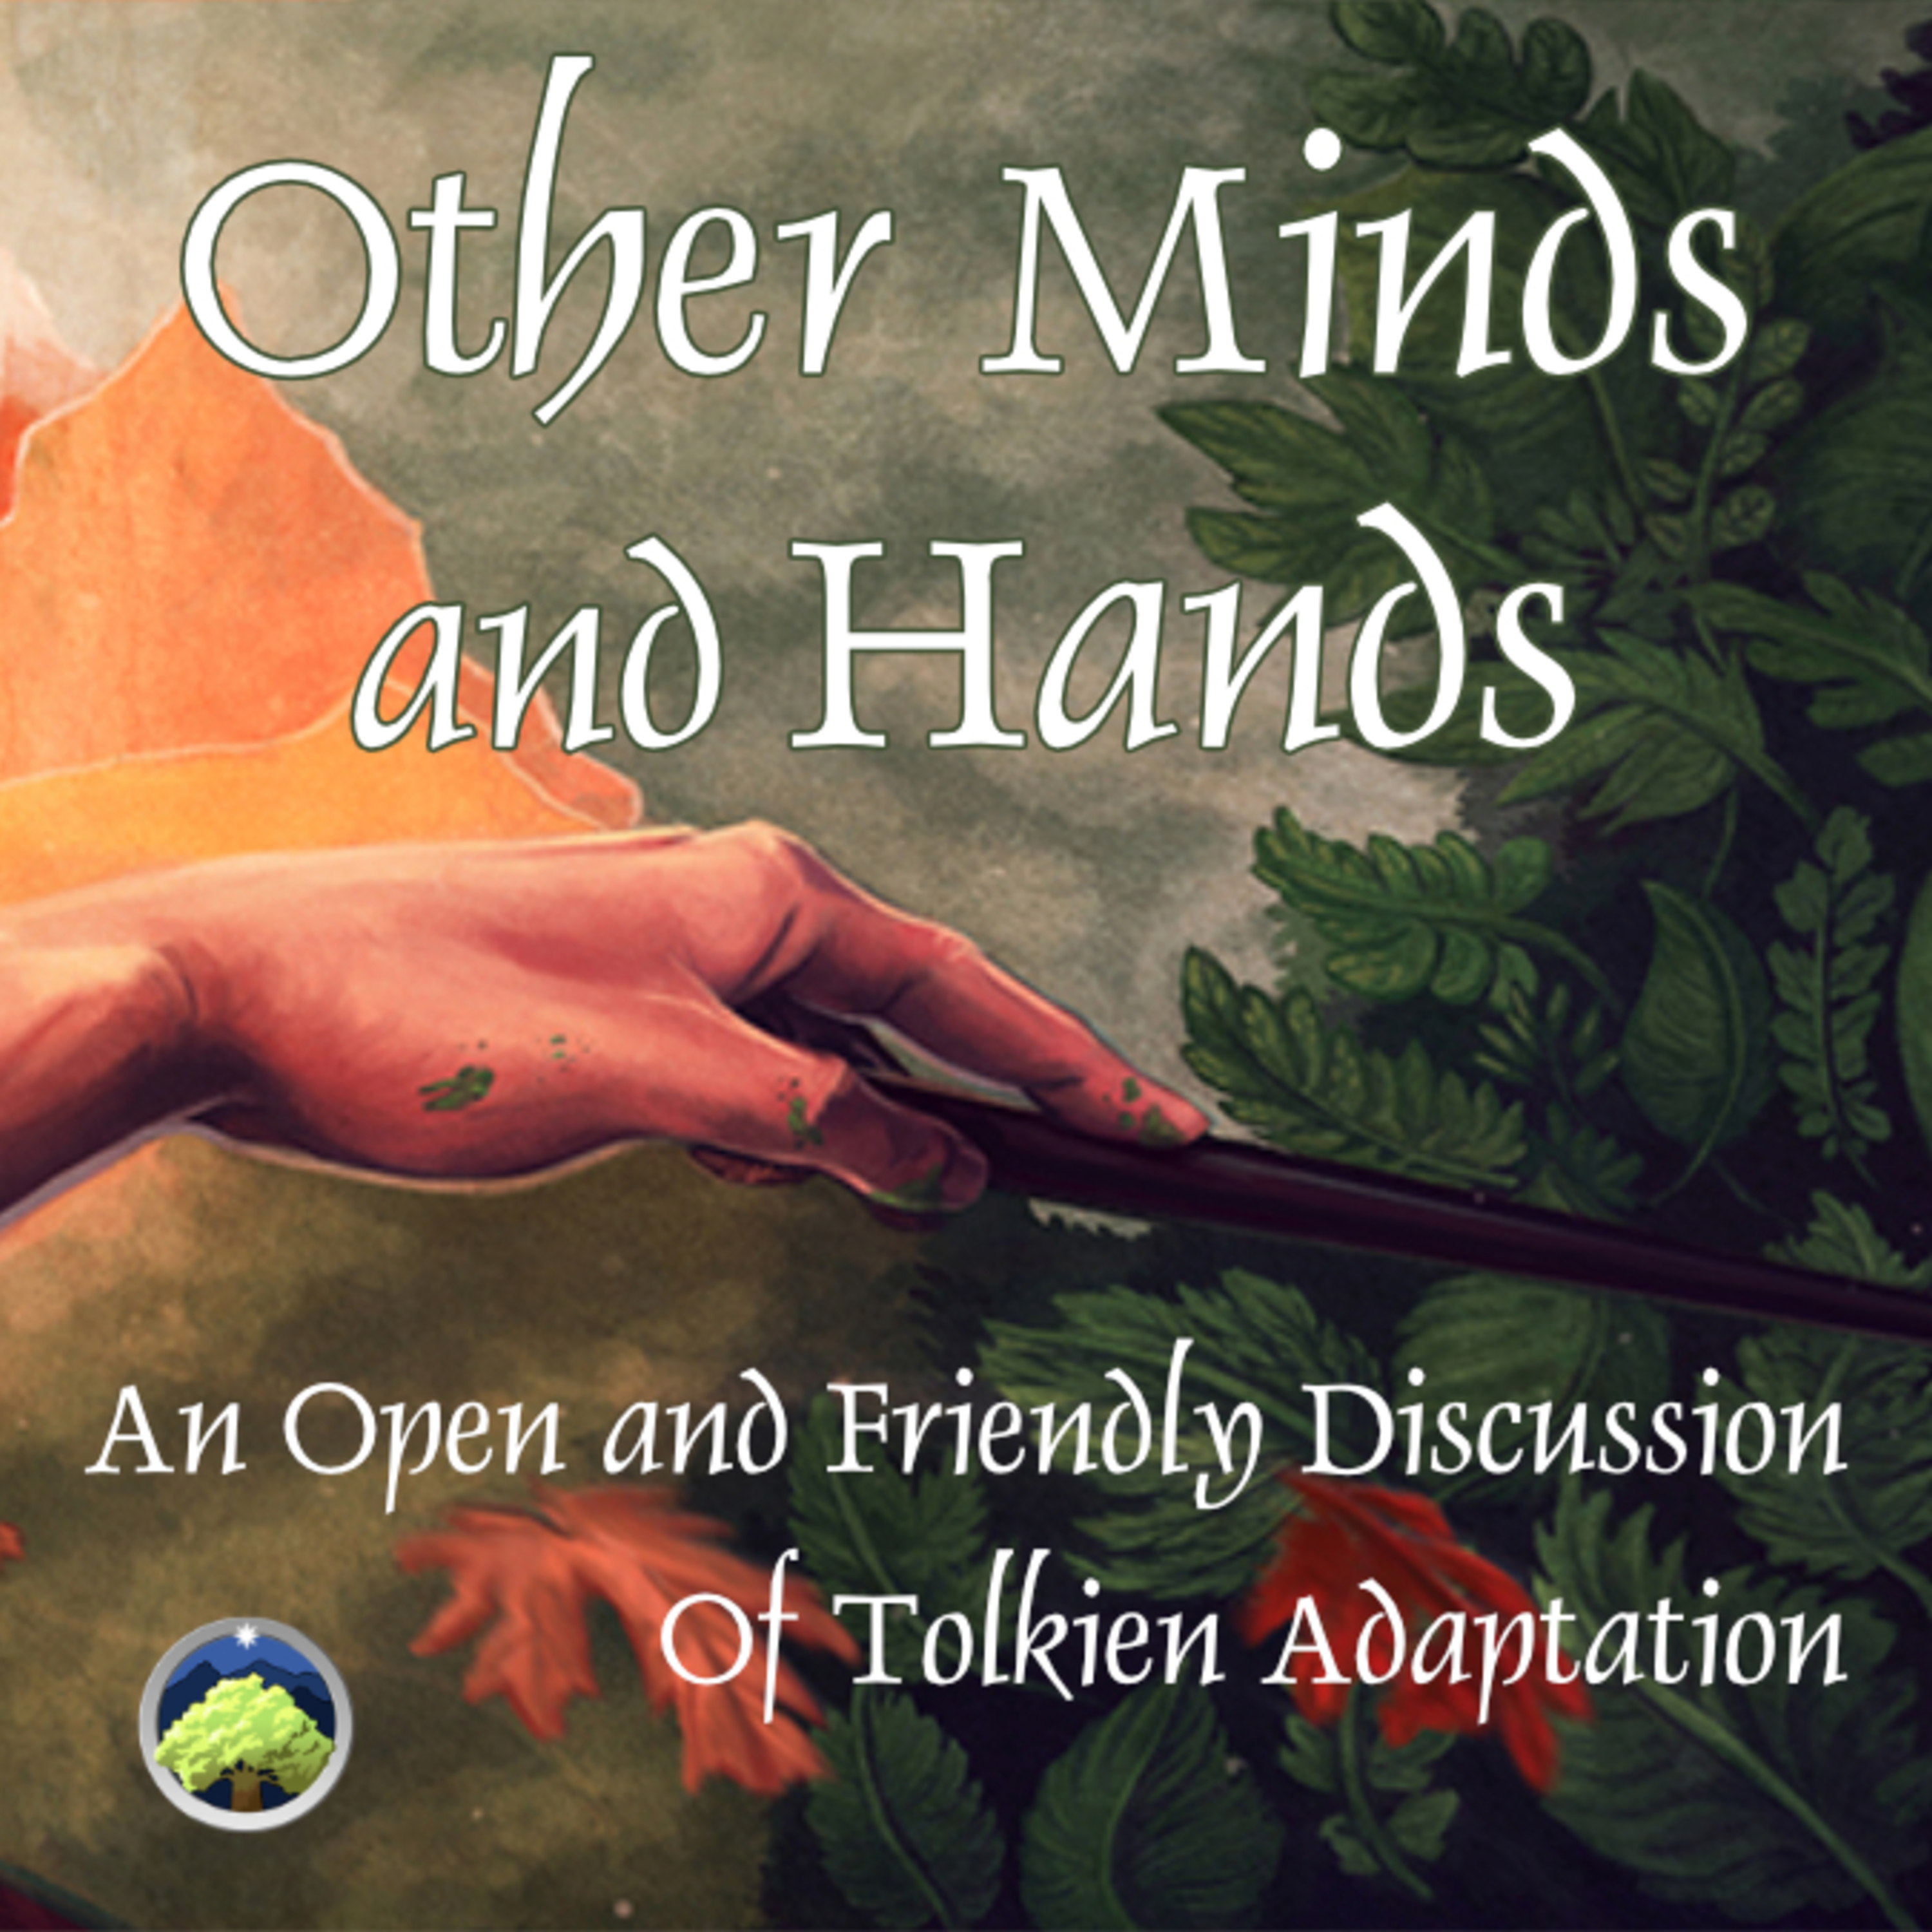 566: Other Minds and Hands, Episode 67